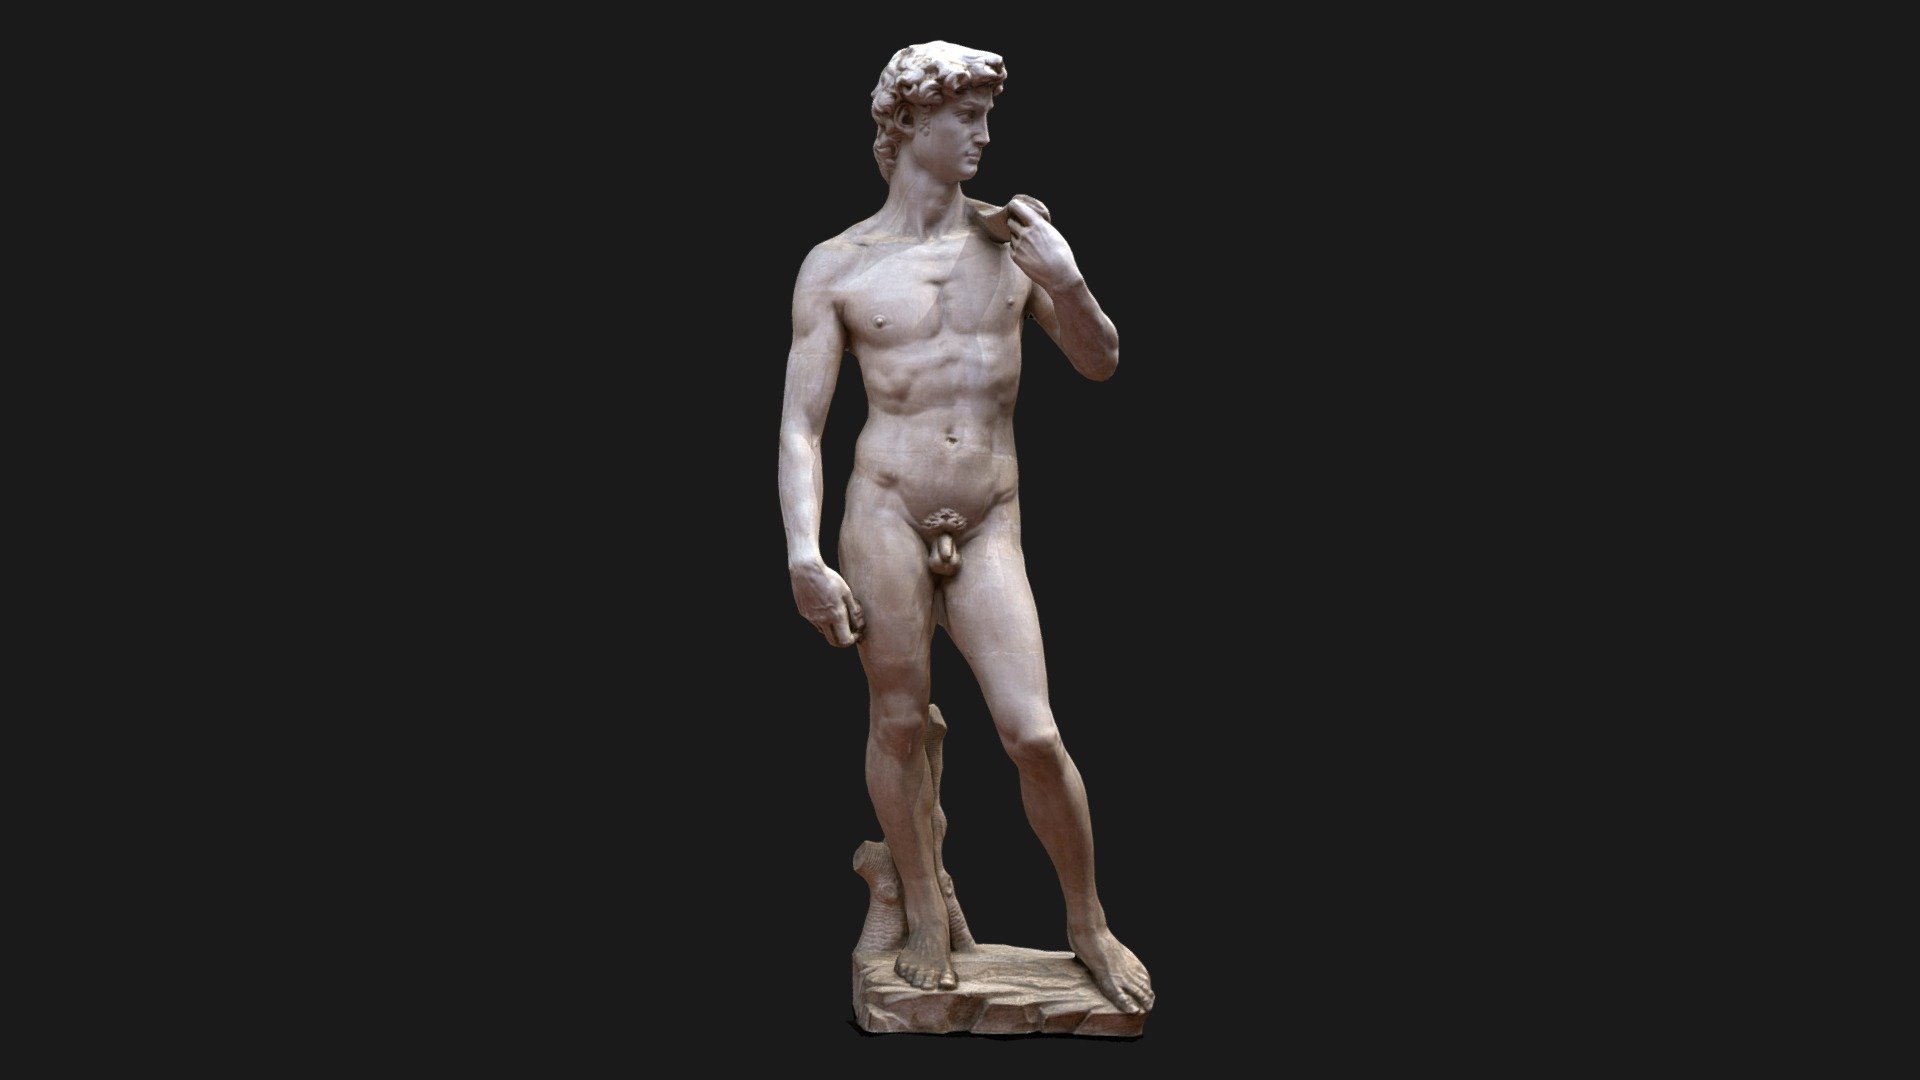 Statue of David.
Low poly 3d model